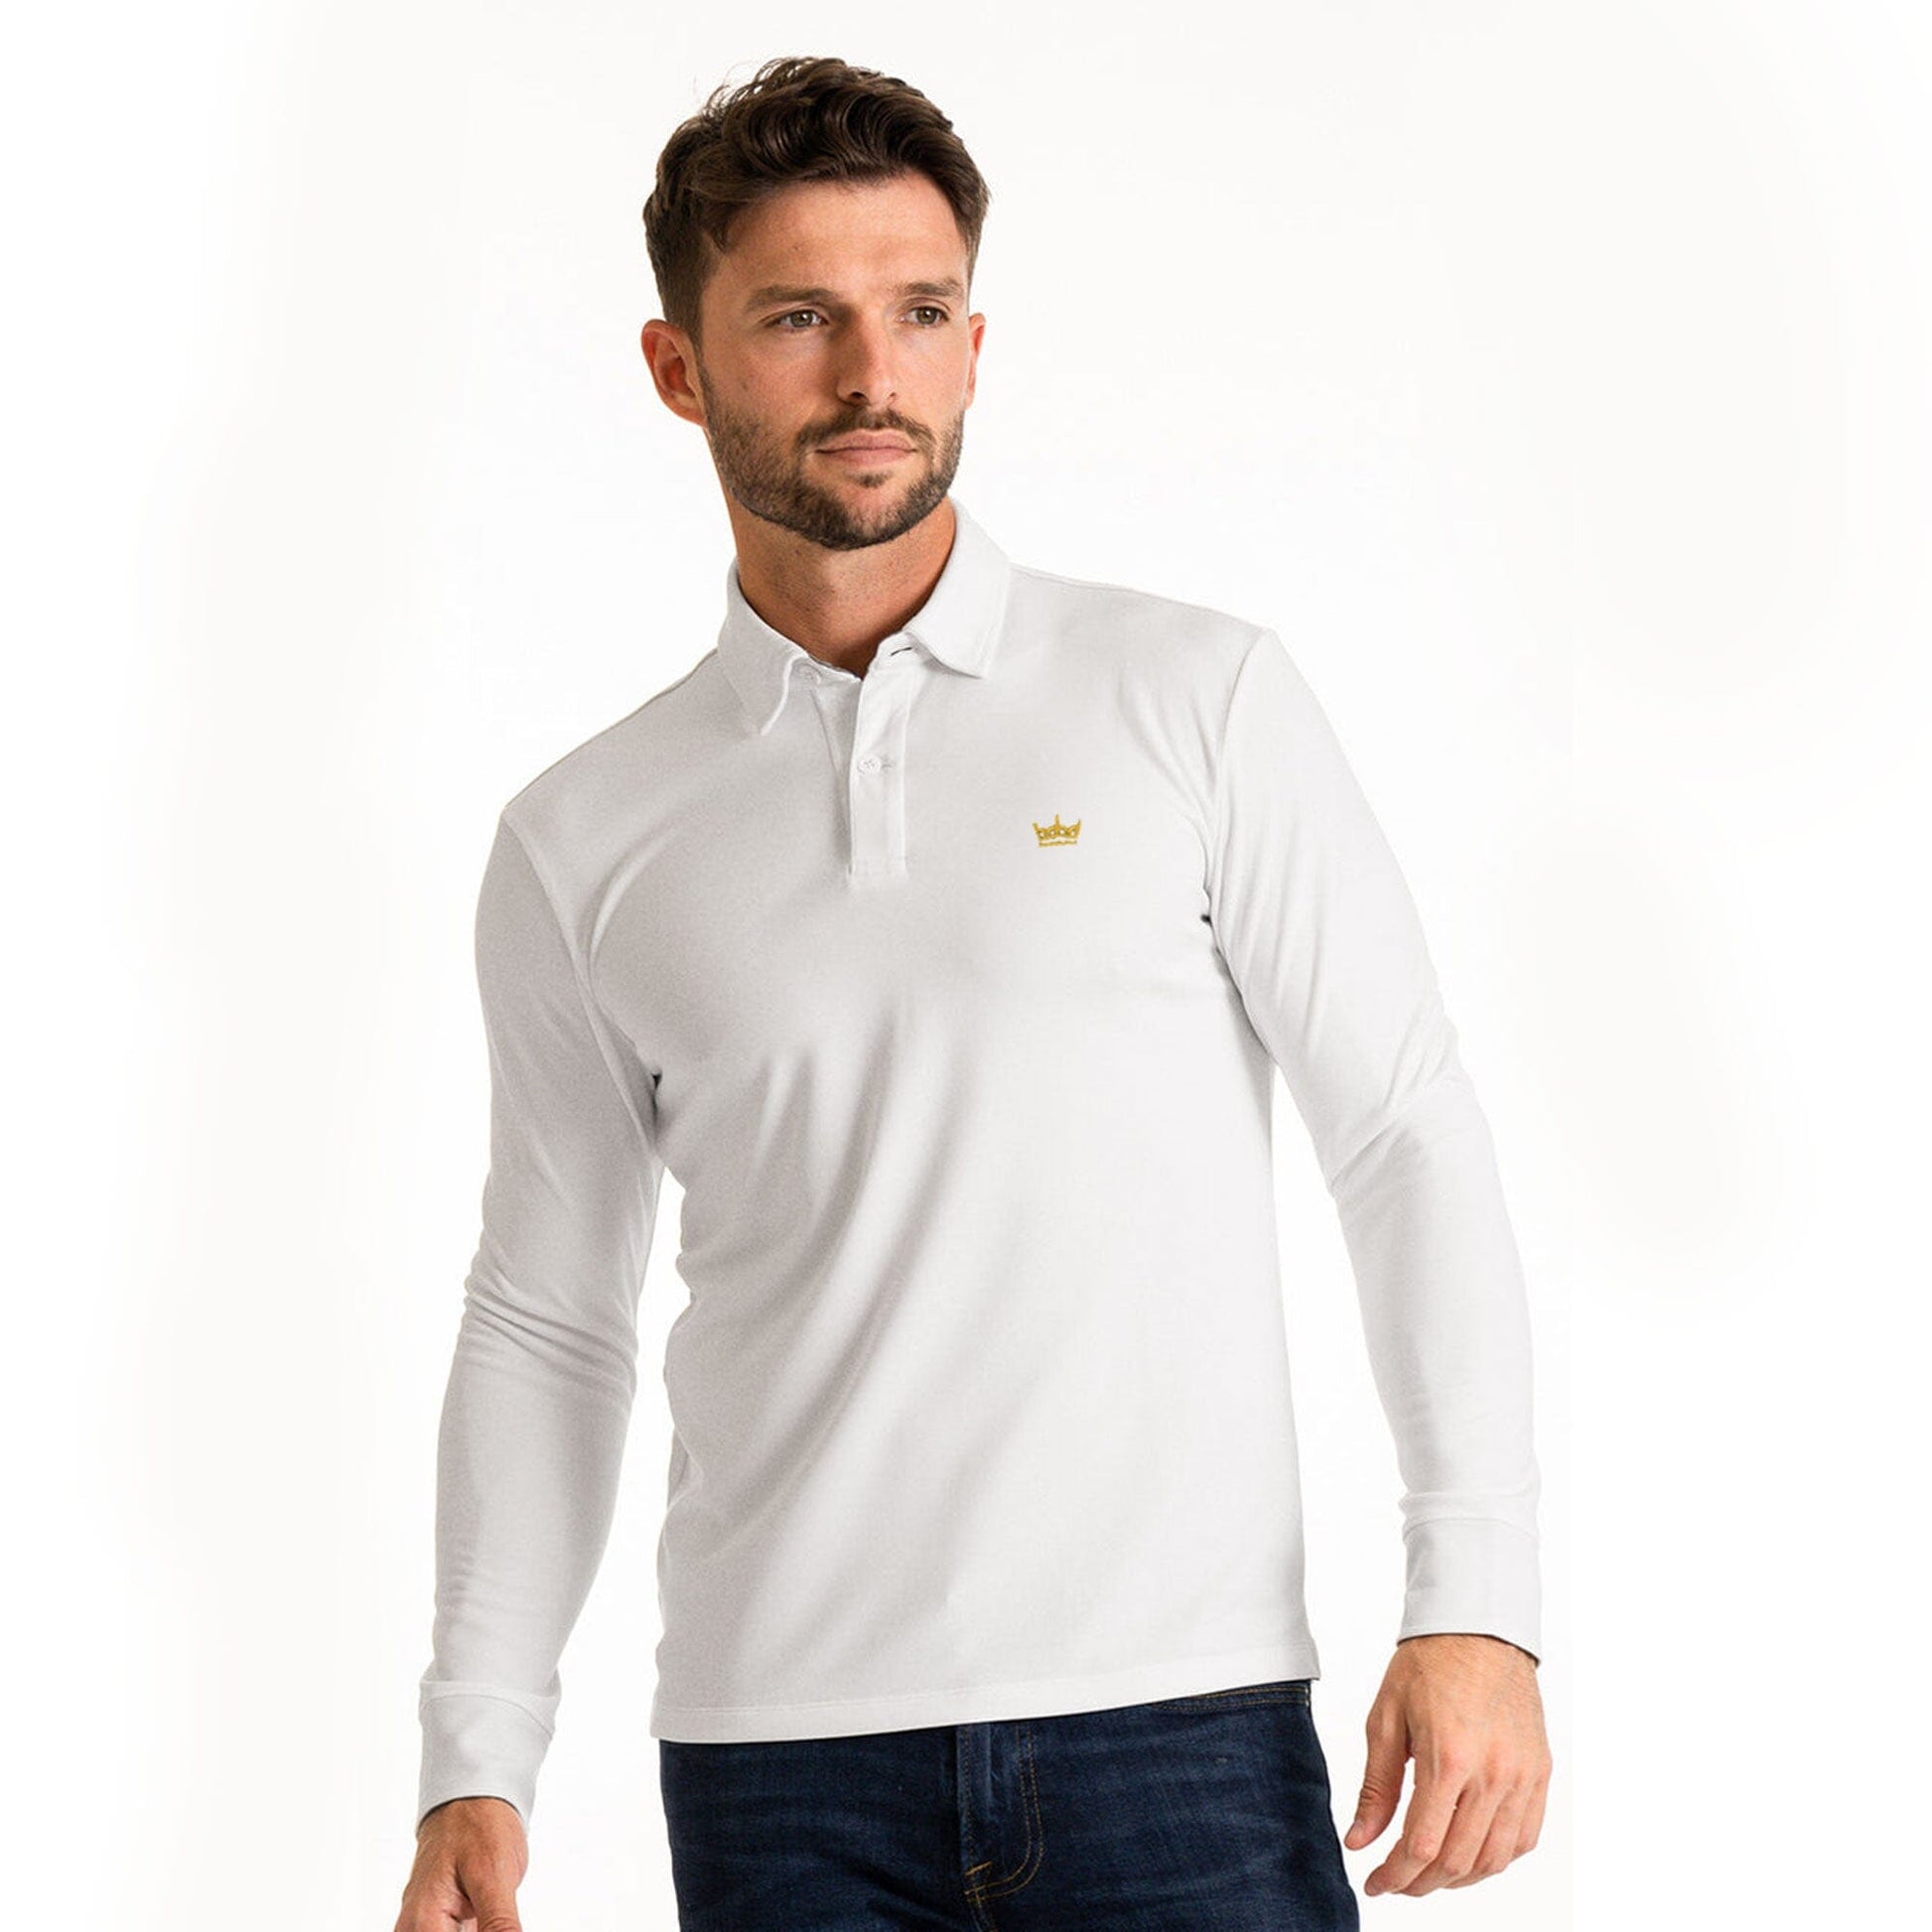 Industrialize Men's Crown Embroidered Long Sleeve Polo Shirt Men's Polo Shirt IST White 2XS 